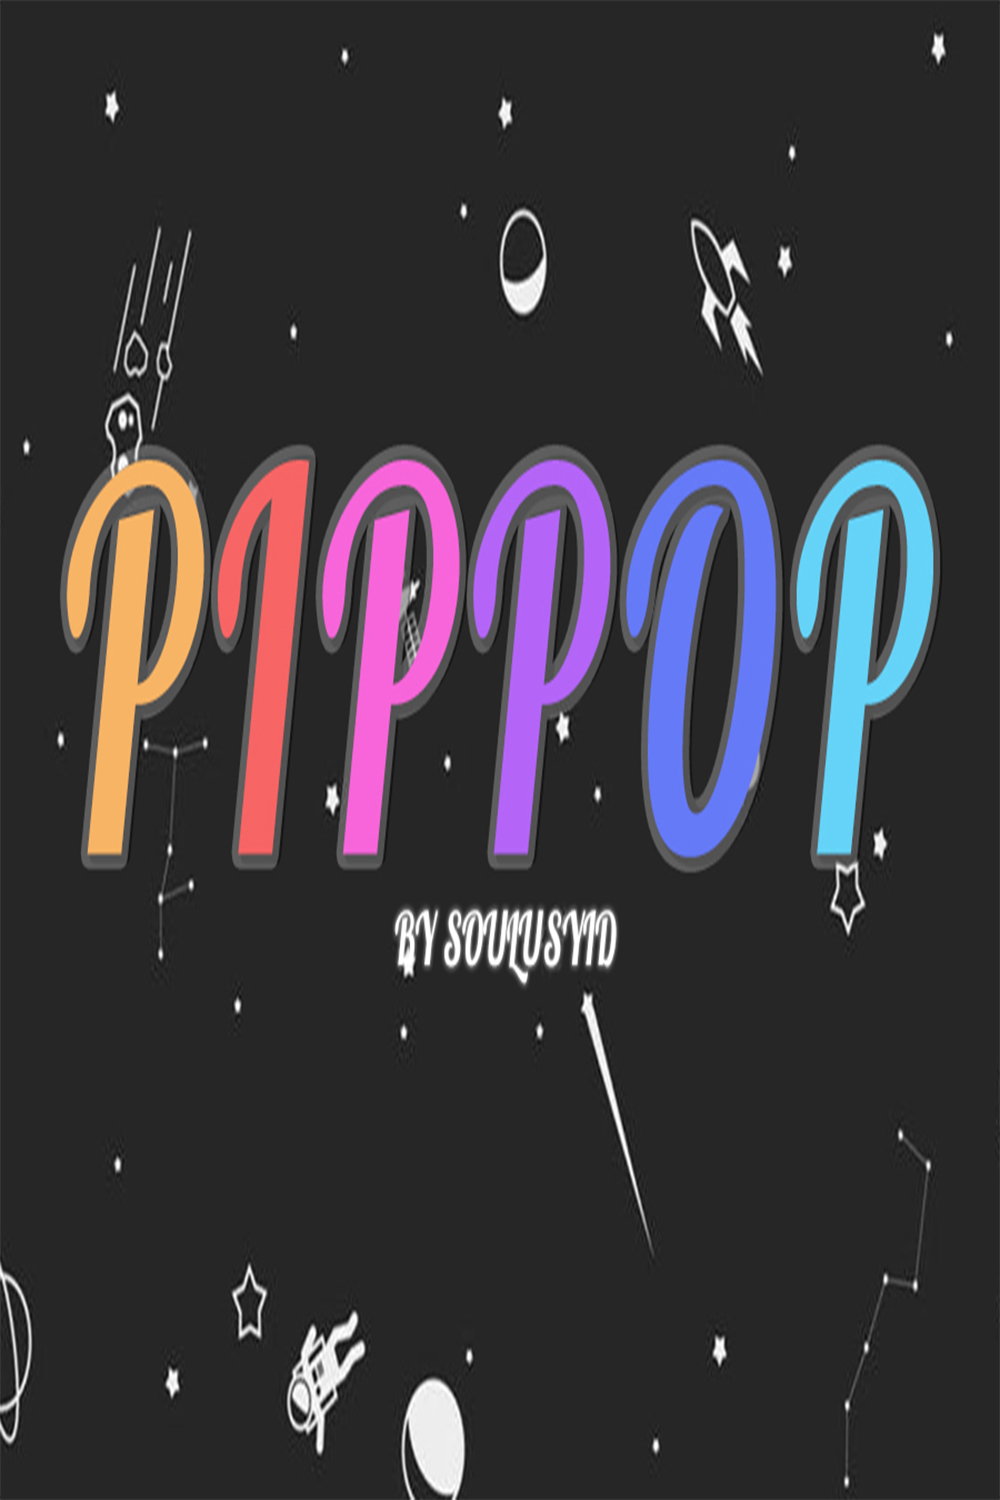 Pippop pinterest preview image.